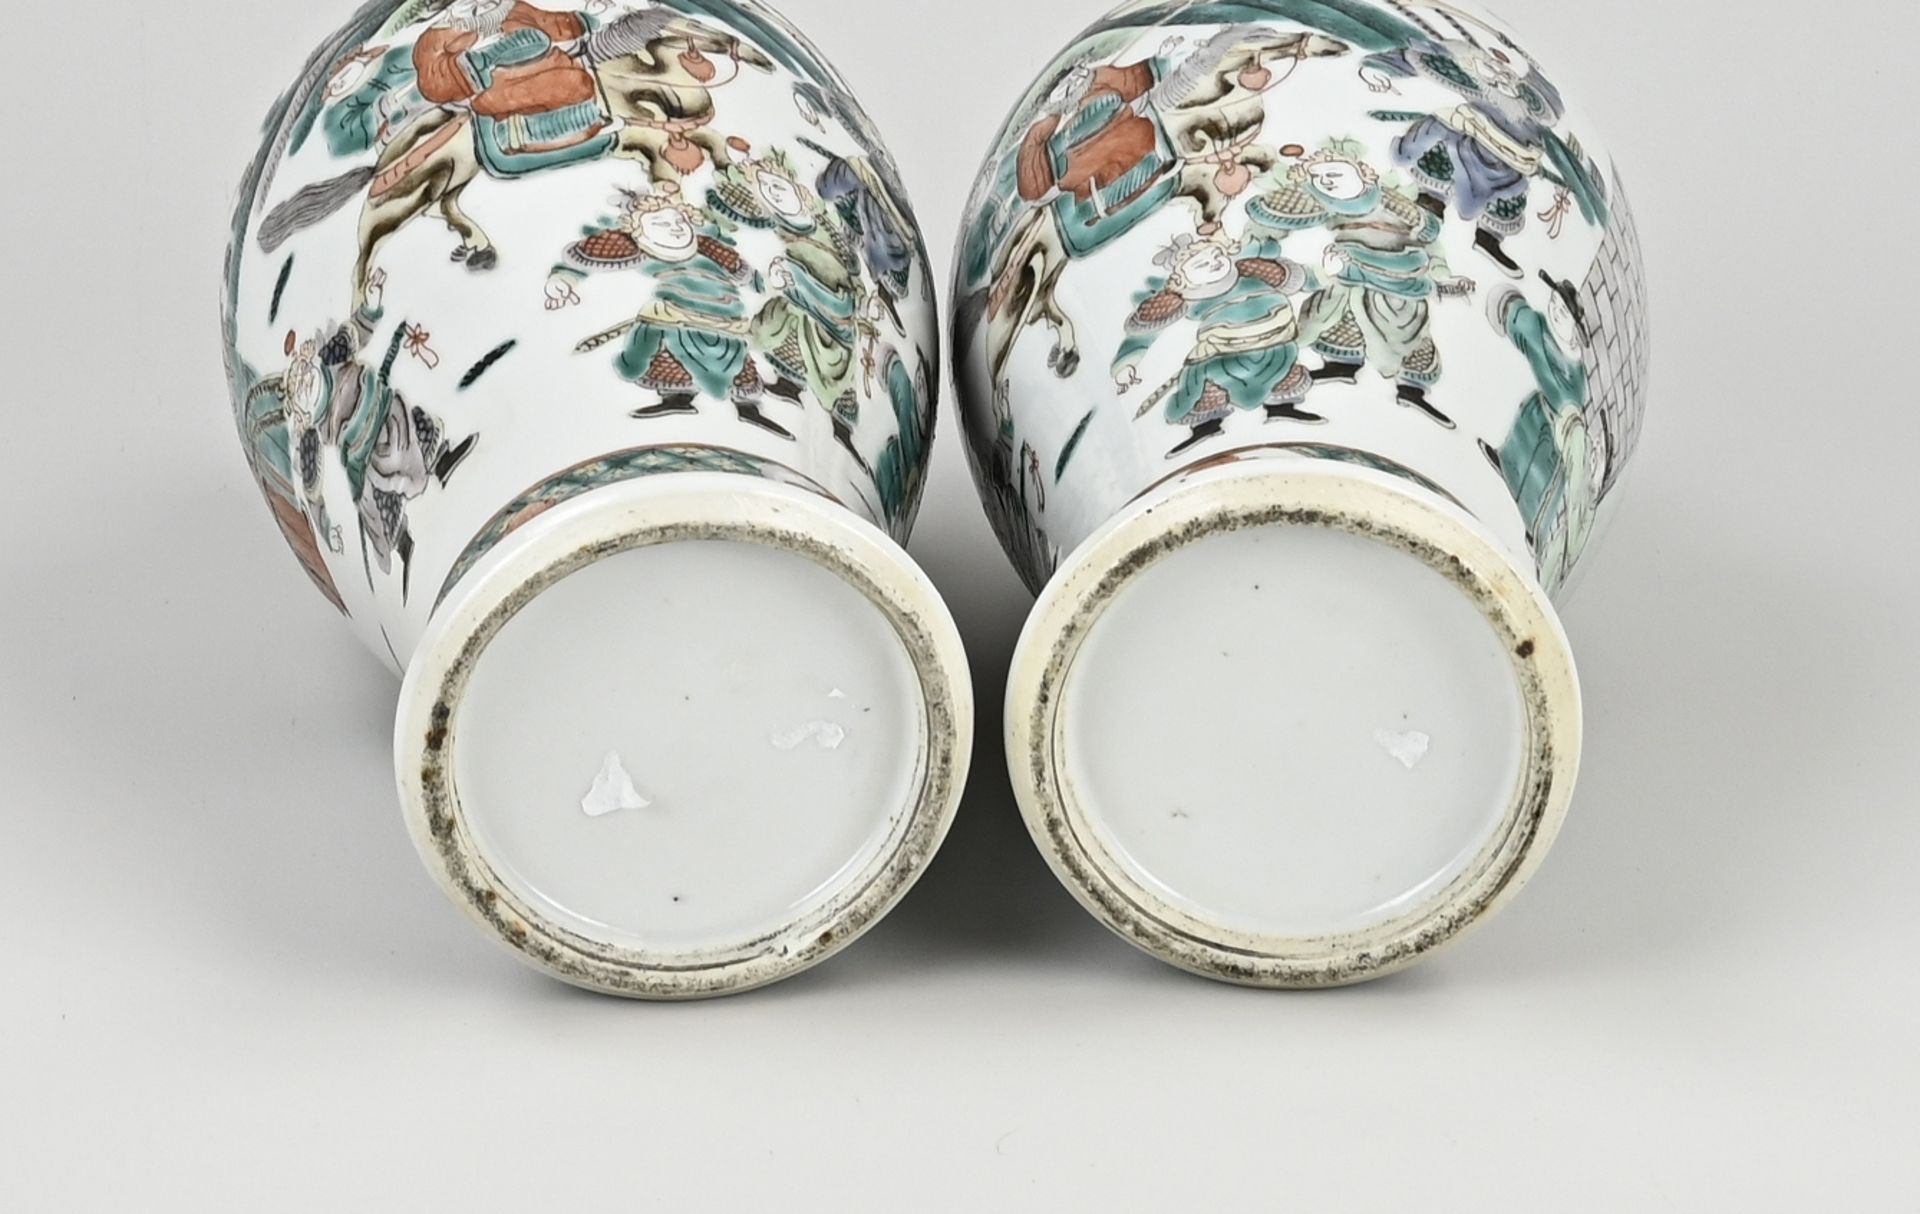 Set of antique Chinese vases, H 33 cm. - Image 2 of 2